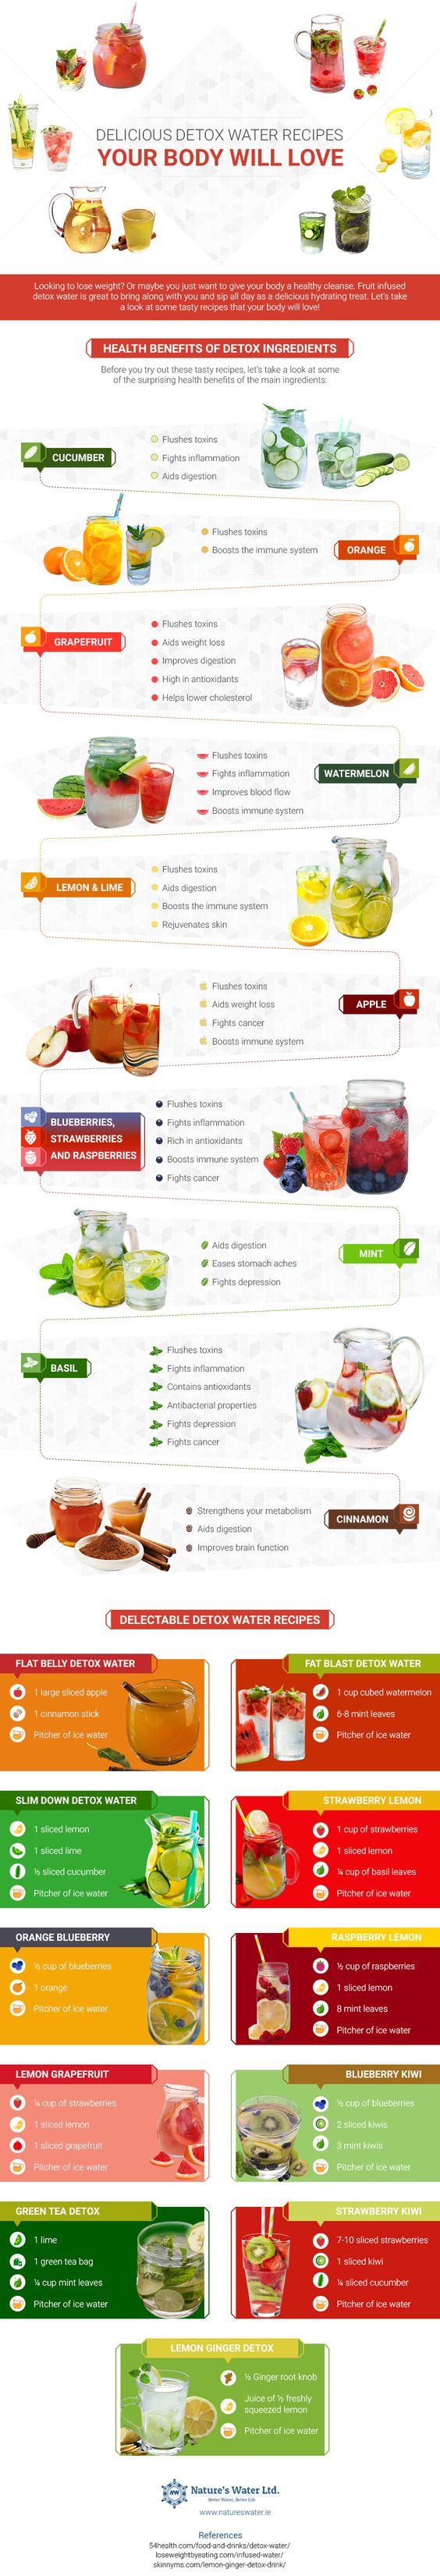 50+ Fruit Infused Water Recipes for Summer Wedding | DPF - Part 2